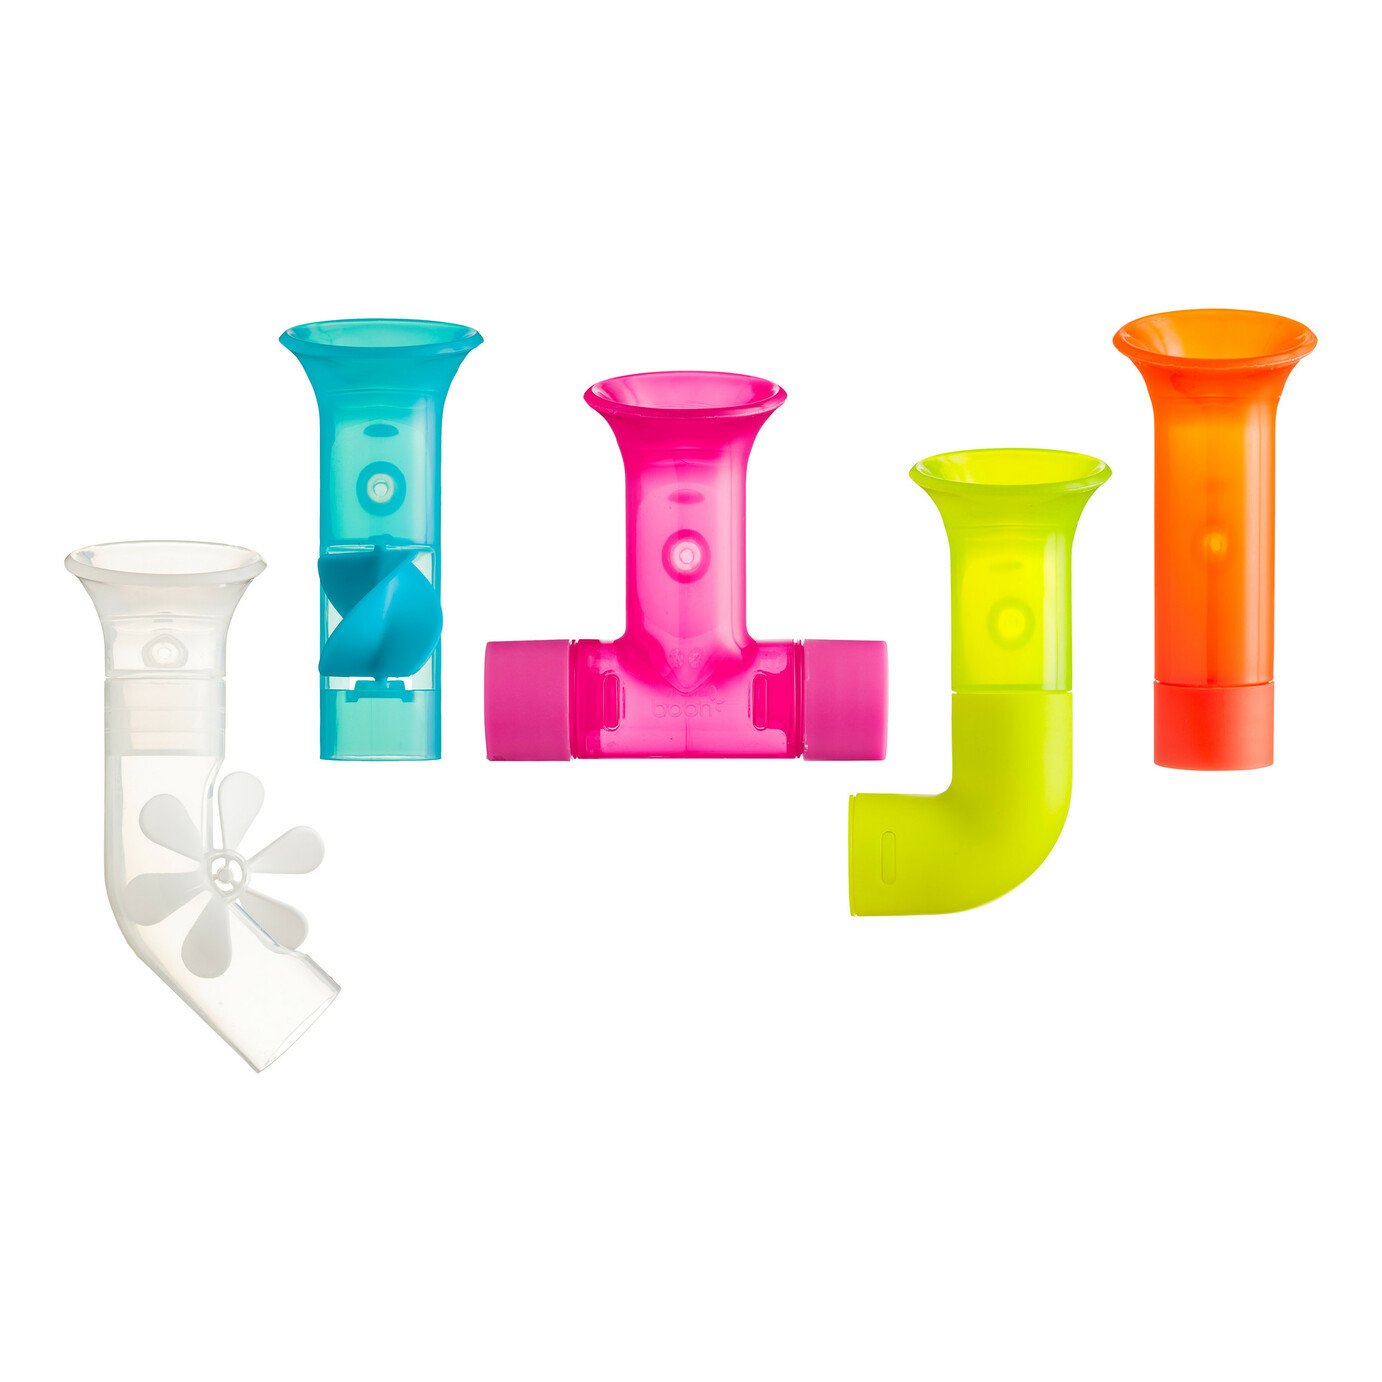 Boon Pipes Bath Toy Review